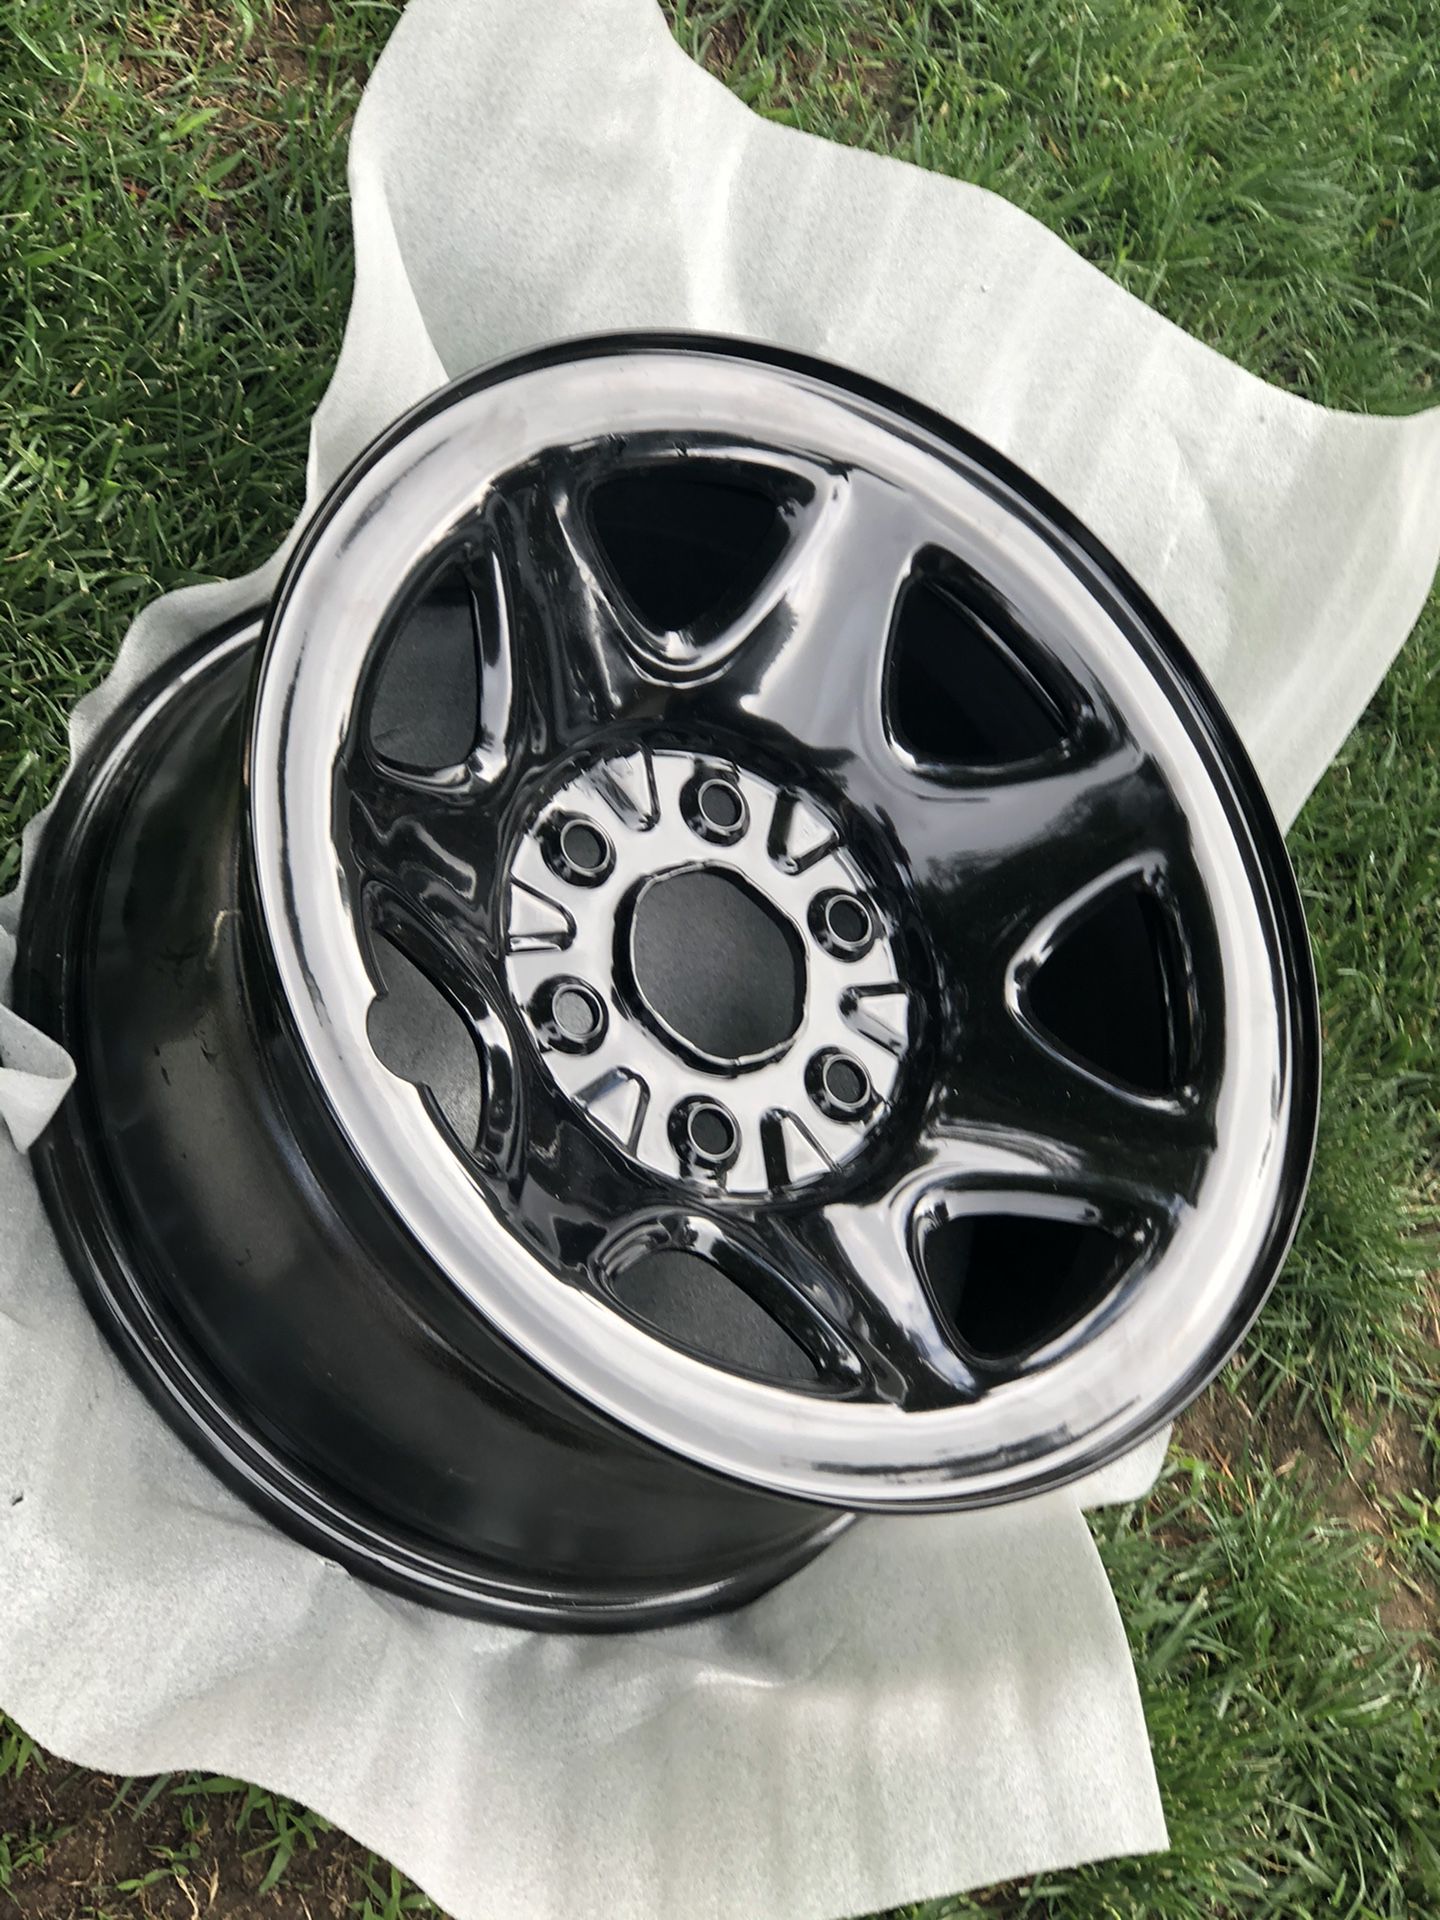 Stock 2019 Silverado 17 inch wheels powder coated black 100 miles on truck and never used after that